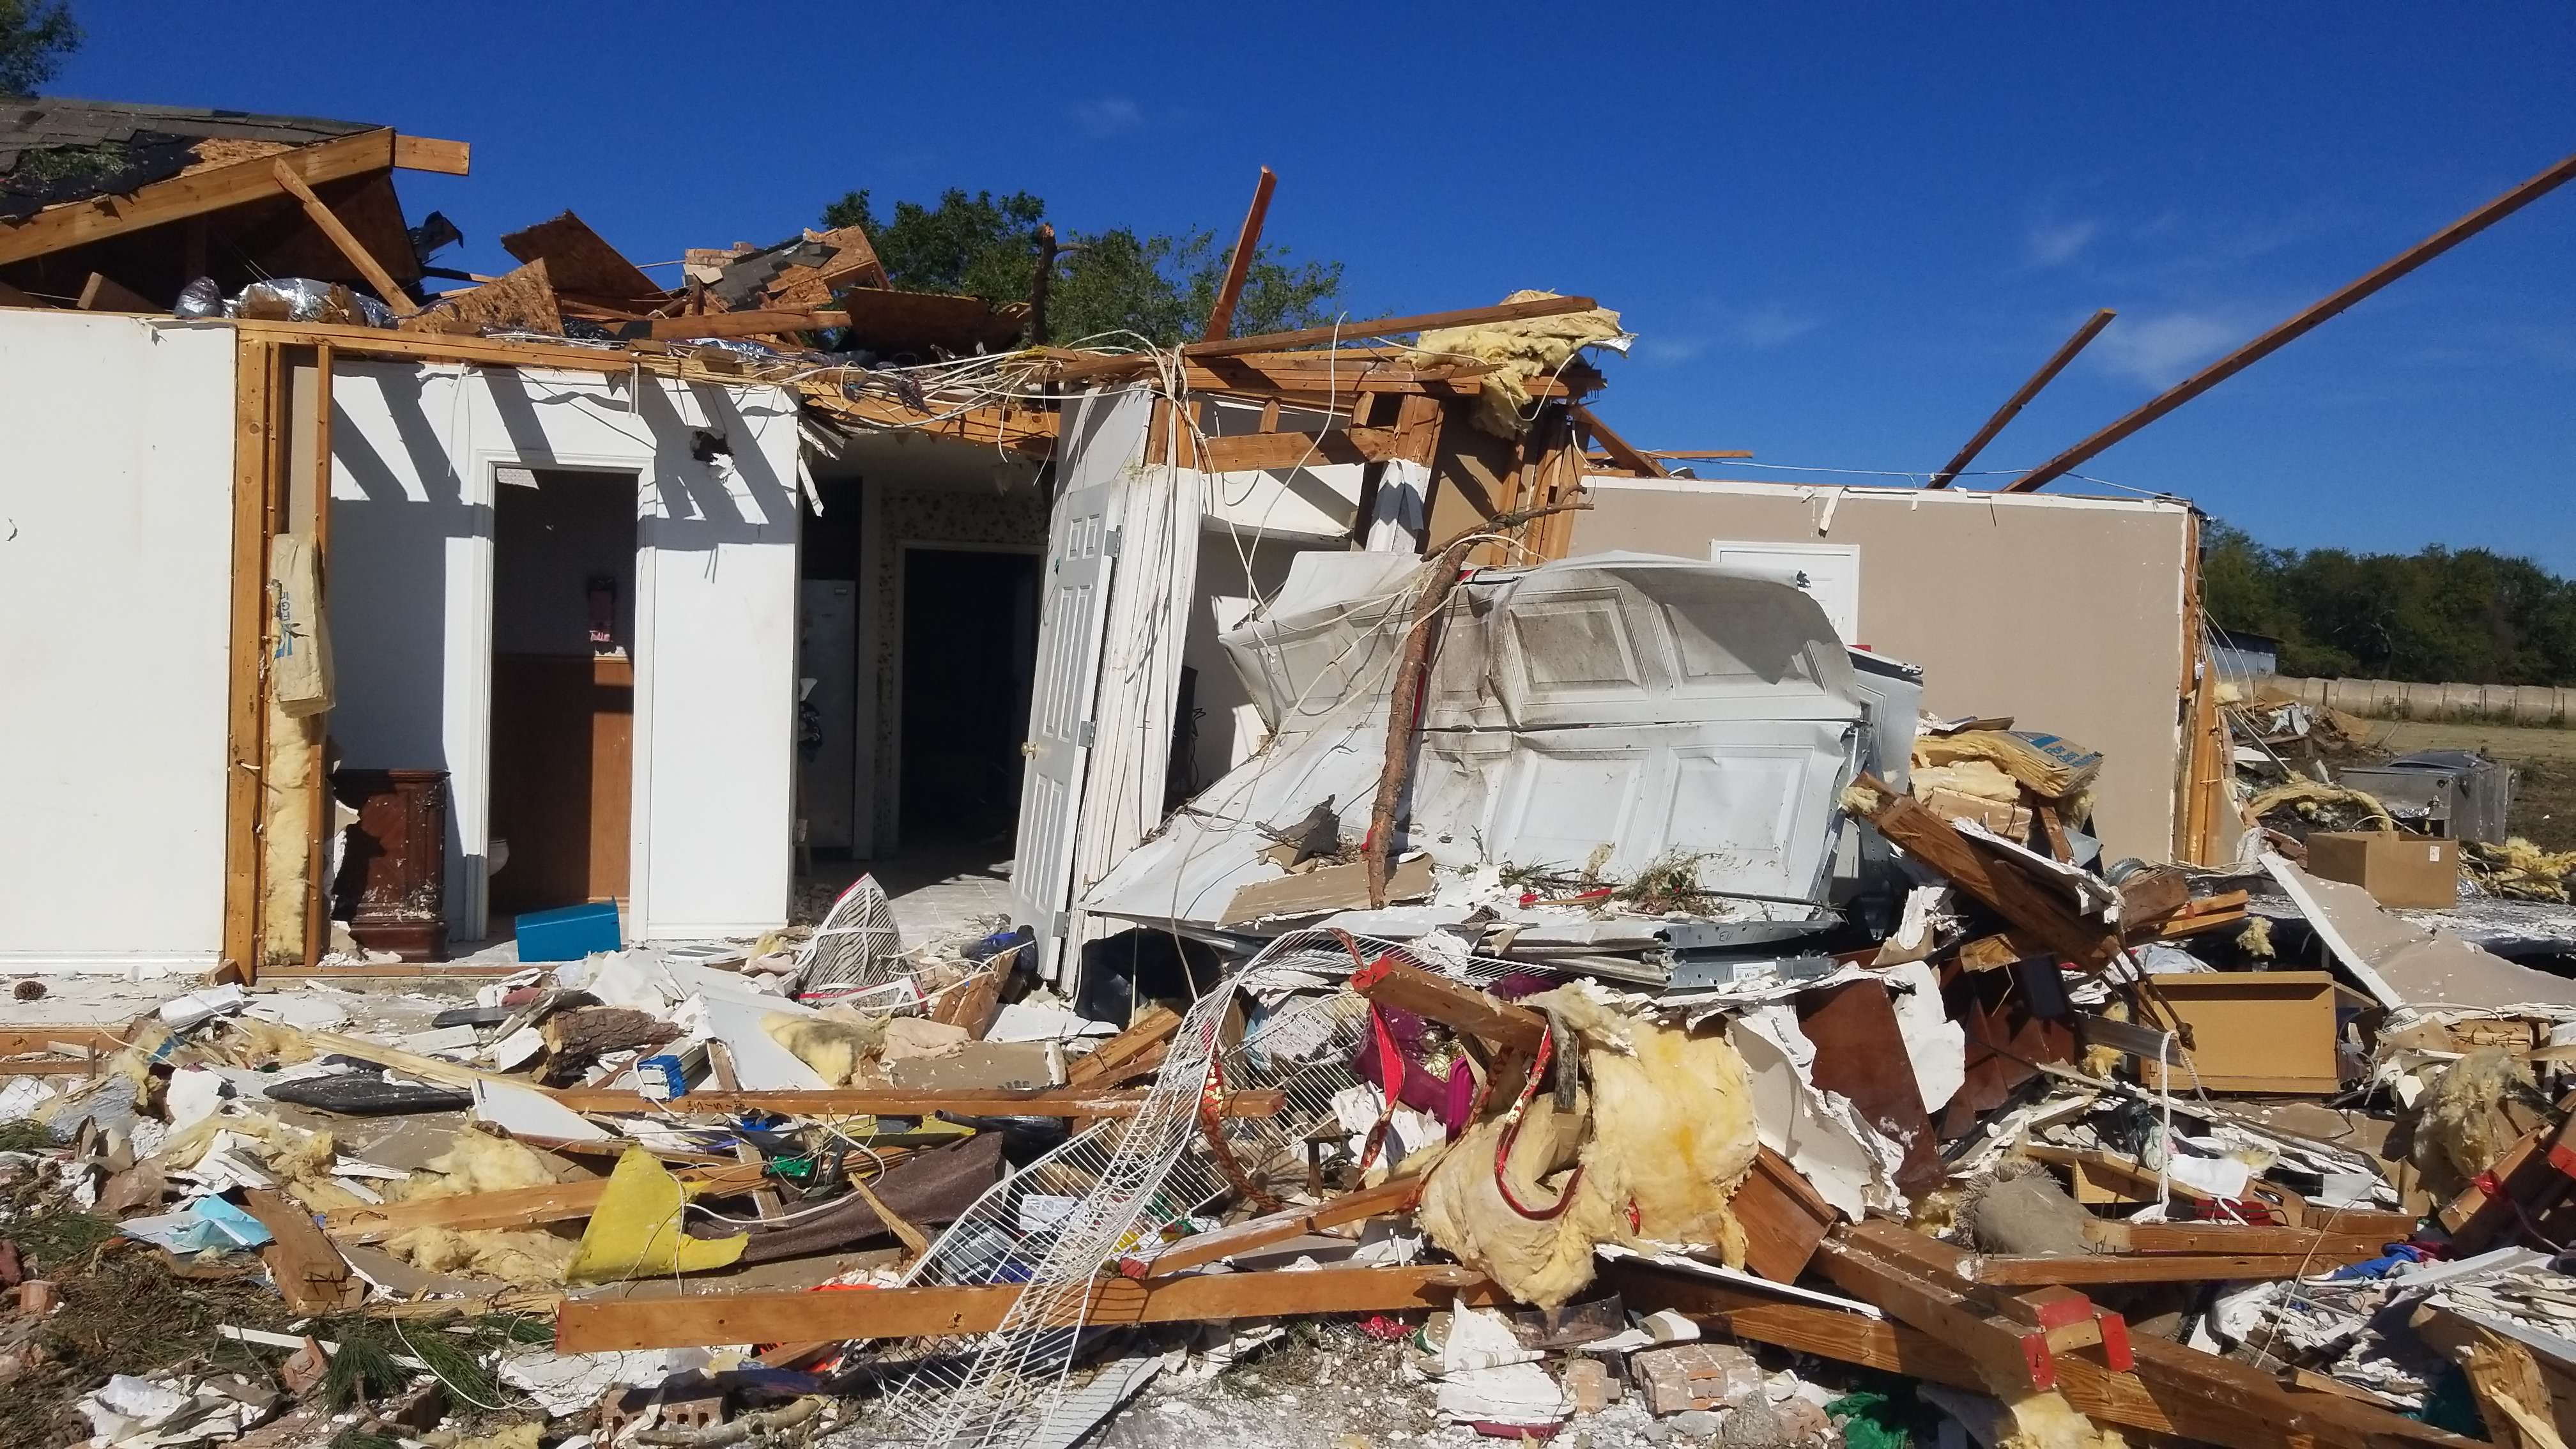 A home that was heavily damaged by an EF2 tornado southwest of Sulphur Springs, Texas.